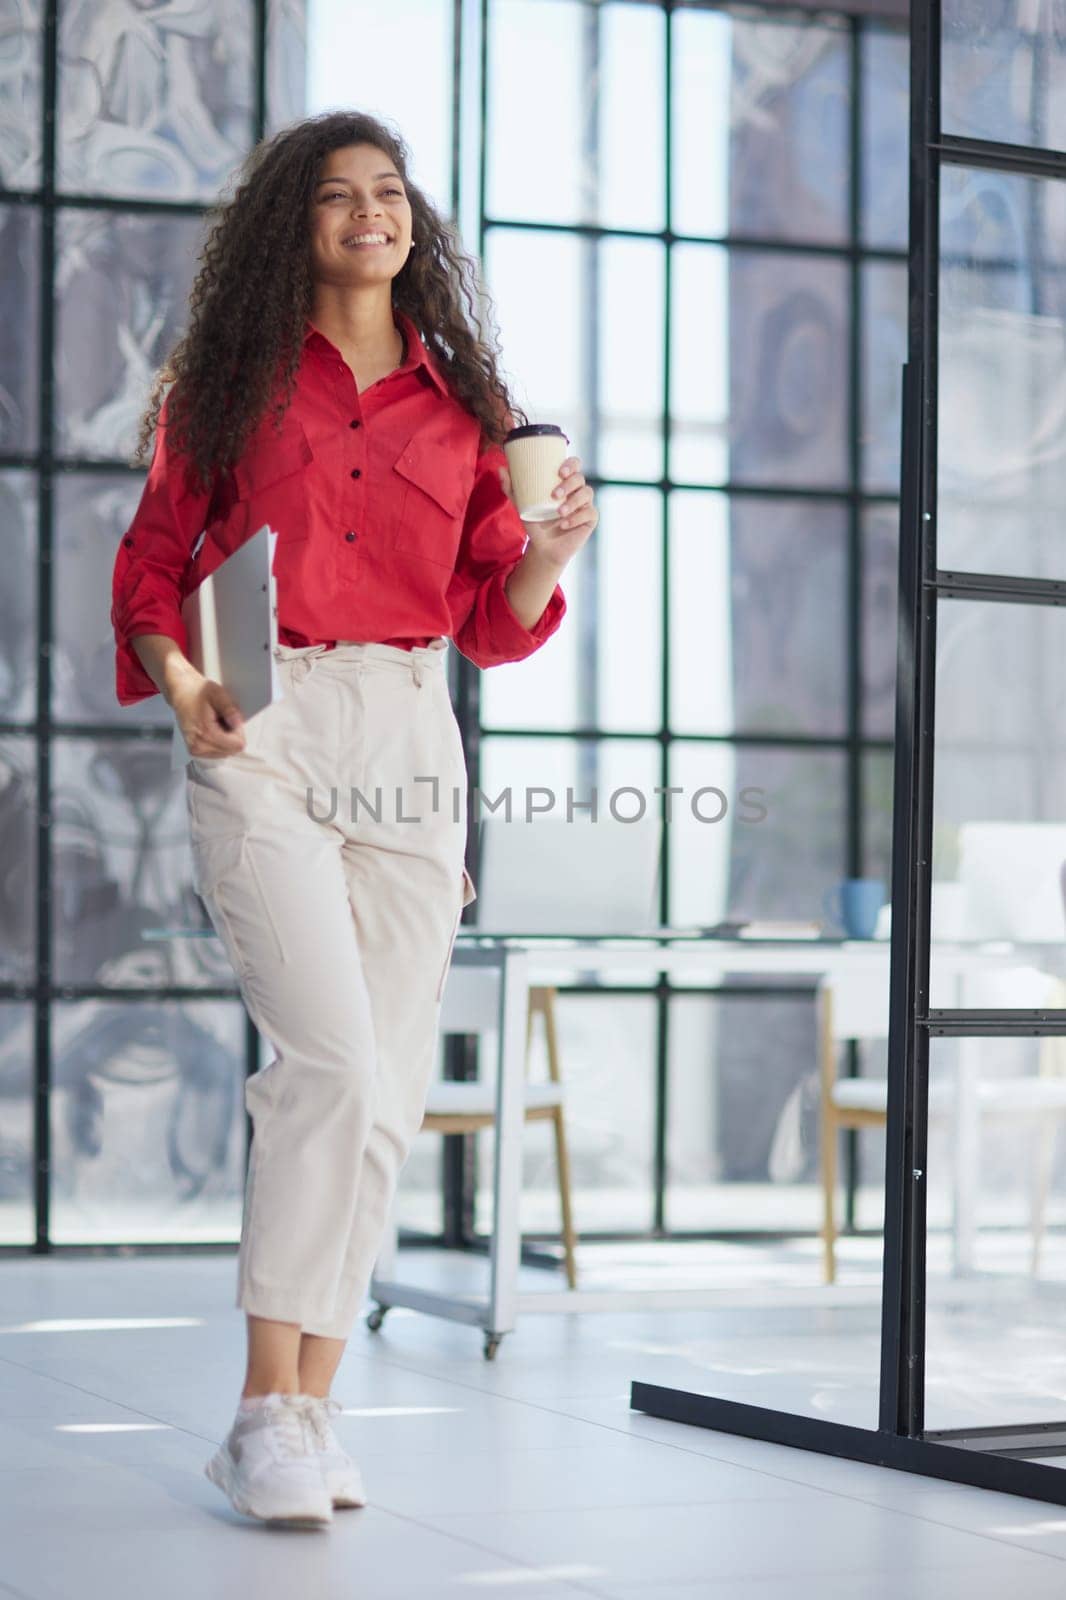 Good coffee to start a new day well. business woman in modern office by Prosto